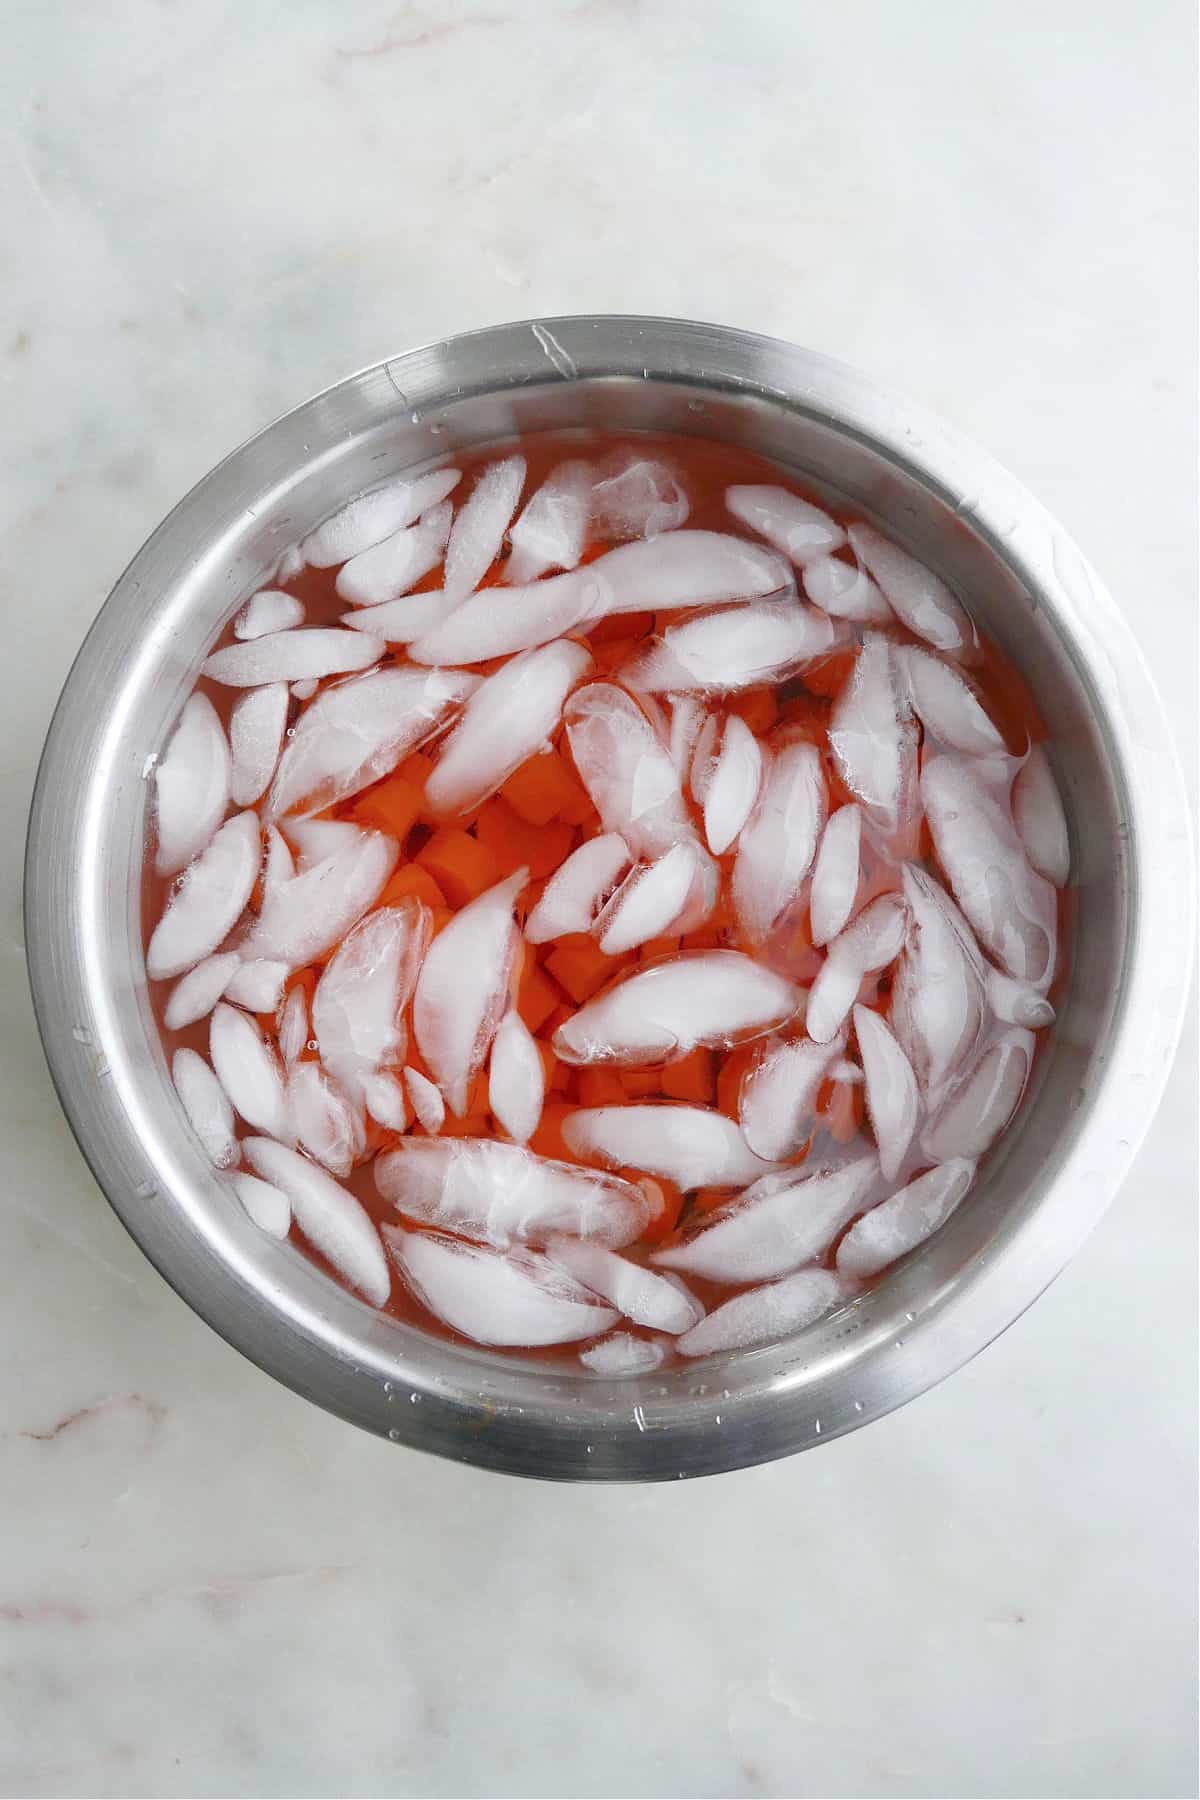 cooked carrot coins in a bowl of ice water on a counter